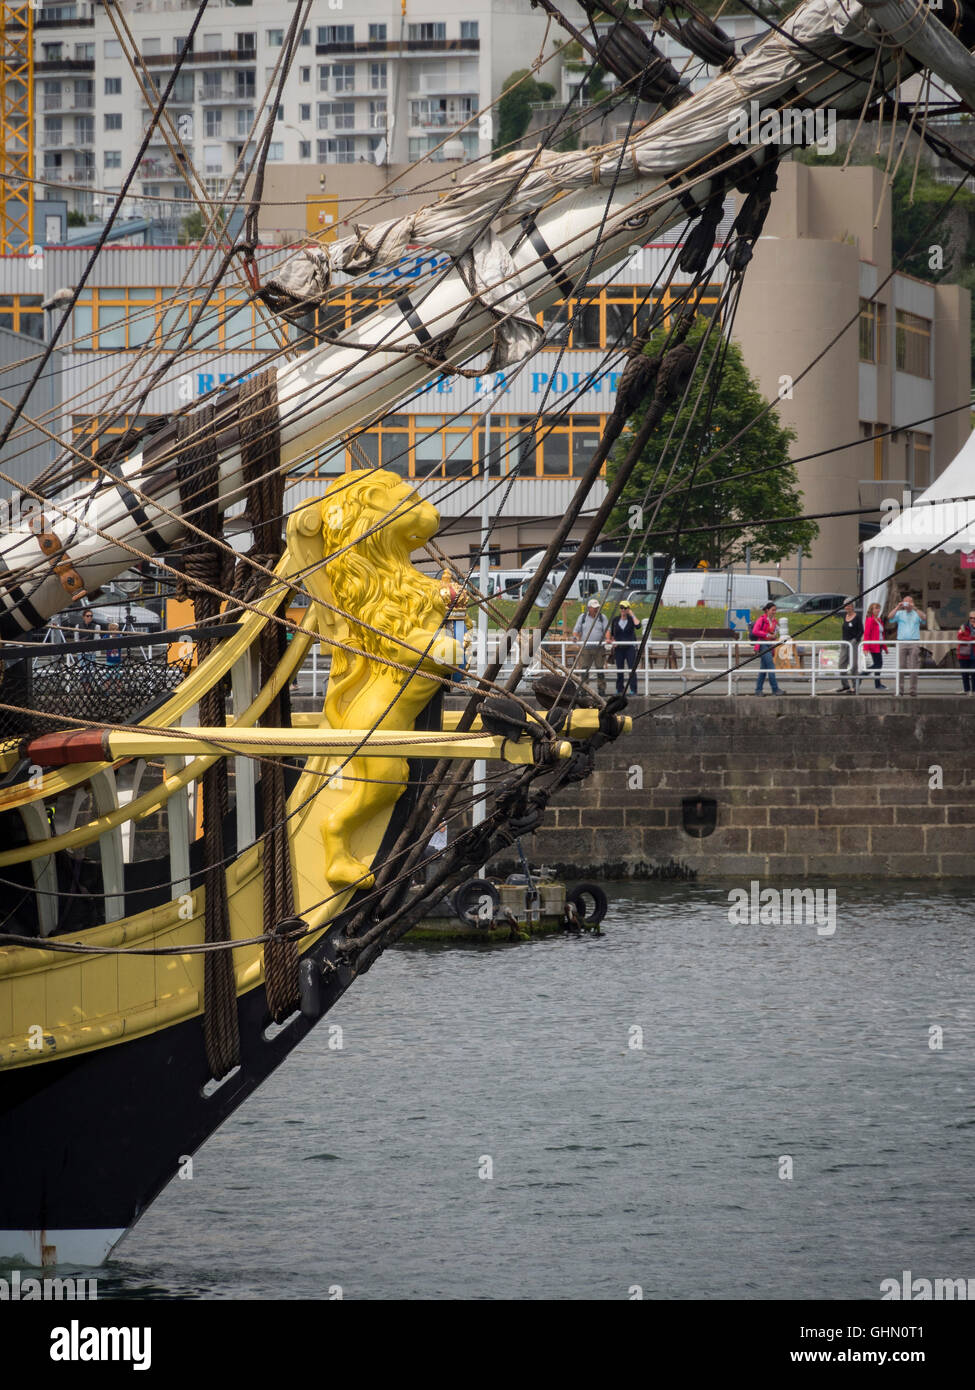 The yellow lion figurehead of the Hermione. Stock Photo